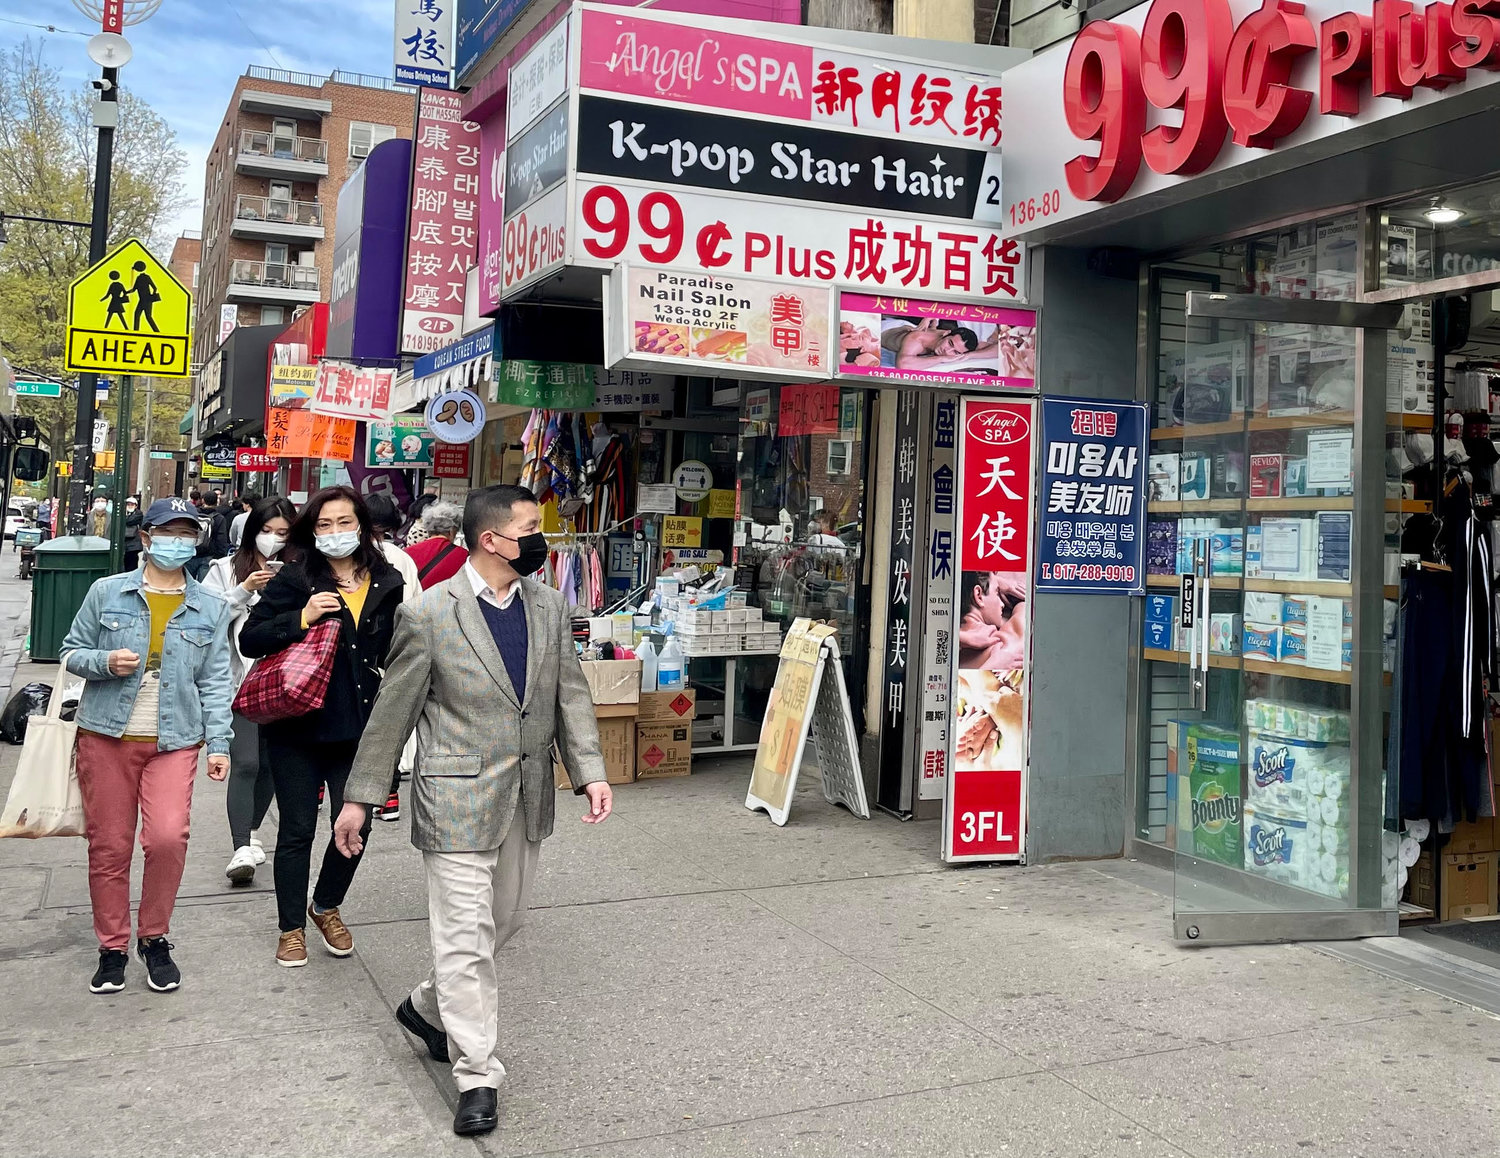 State legislation introduced last year would remove criminal penalties for those who practice unlicensed massage. The bill would also prevent law enforcement from seizing the property of massage workers, many of whom are employed at legitimate spas and massage parlors along Flushing’s Roosevelt Avenue.